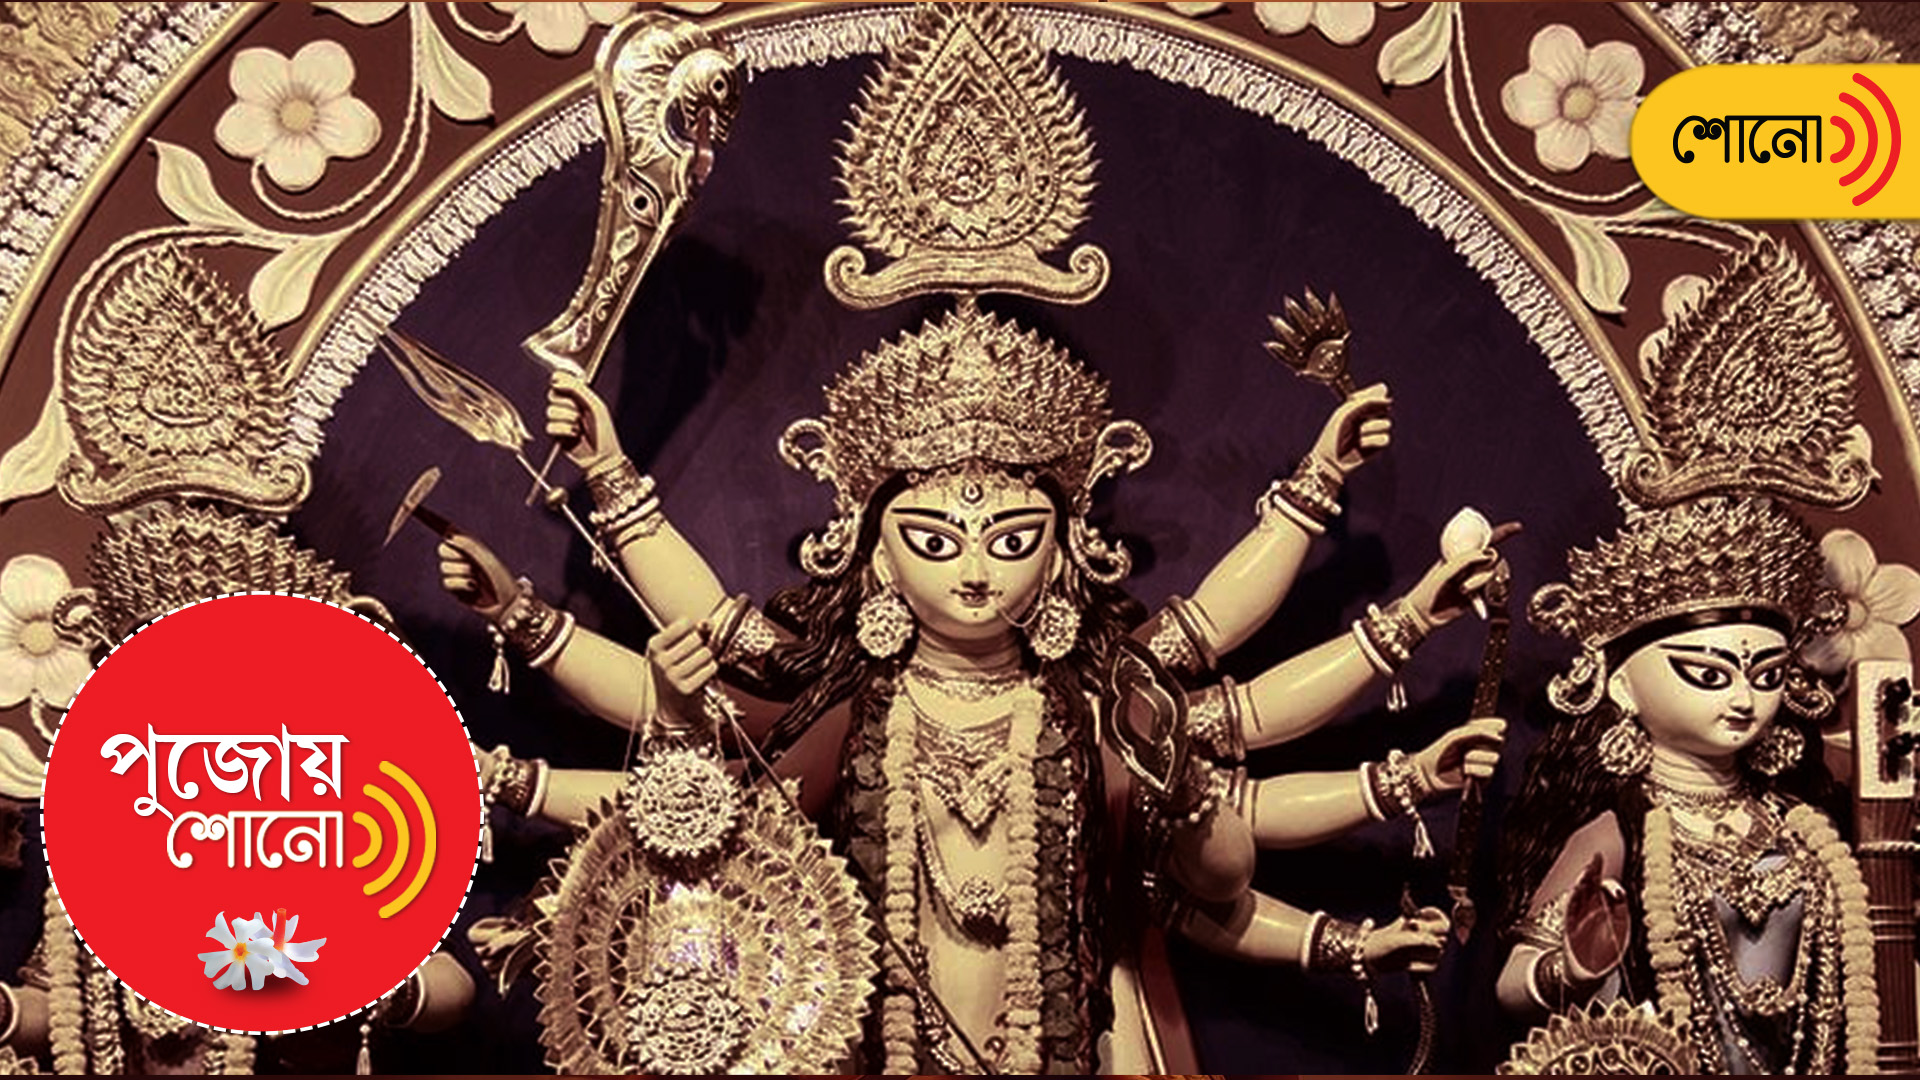 know more about the ten weapons carried by Goddess Durga